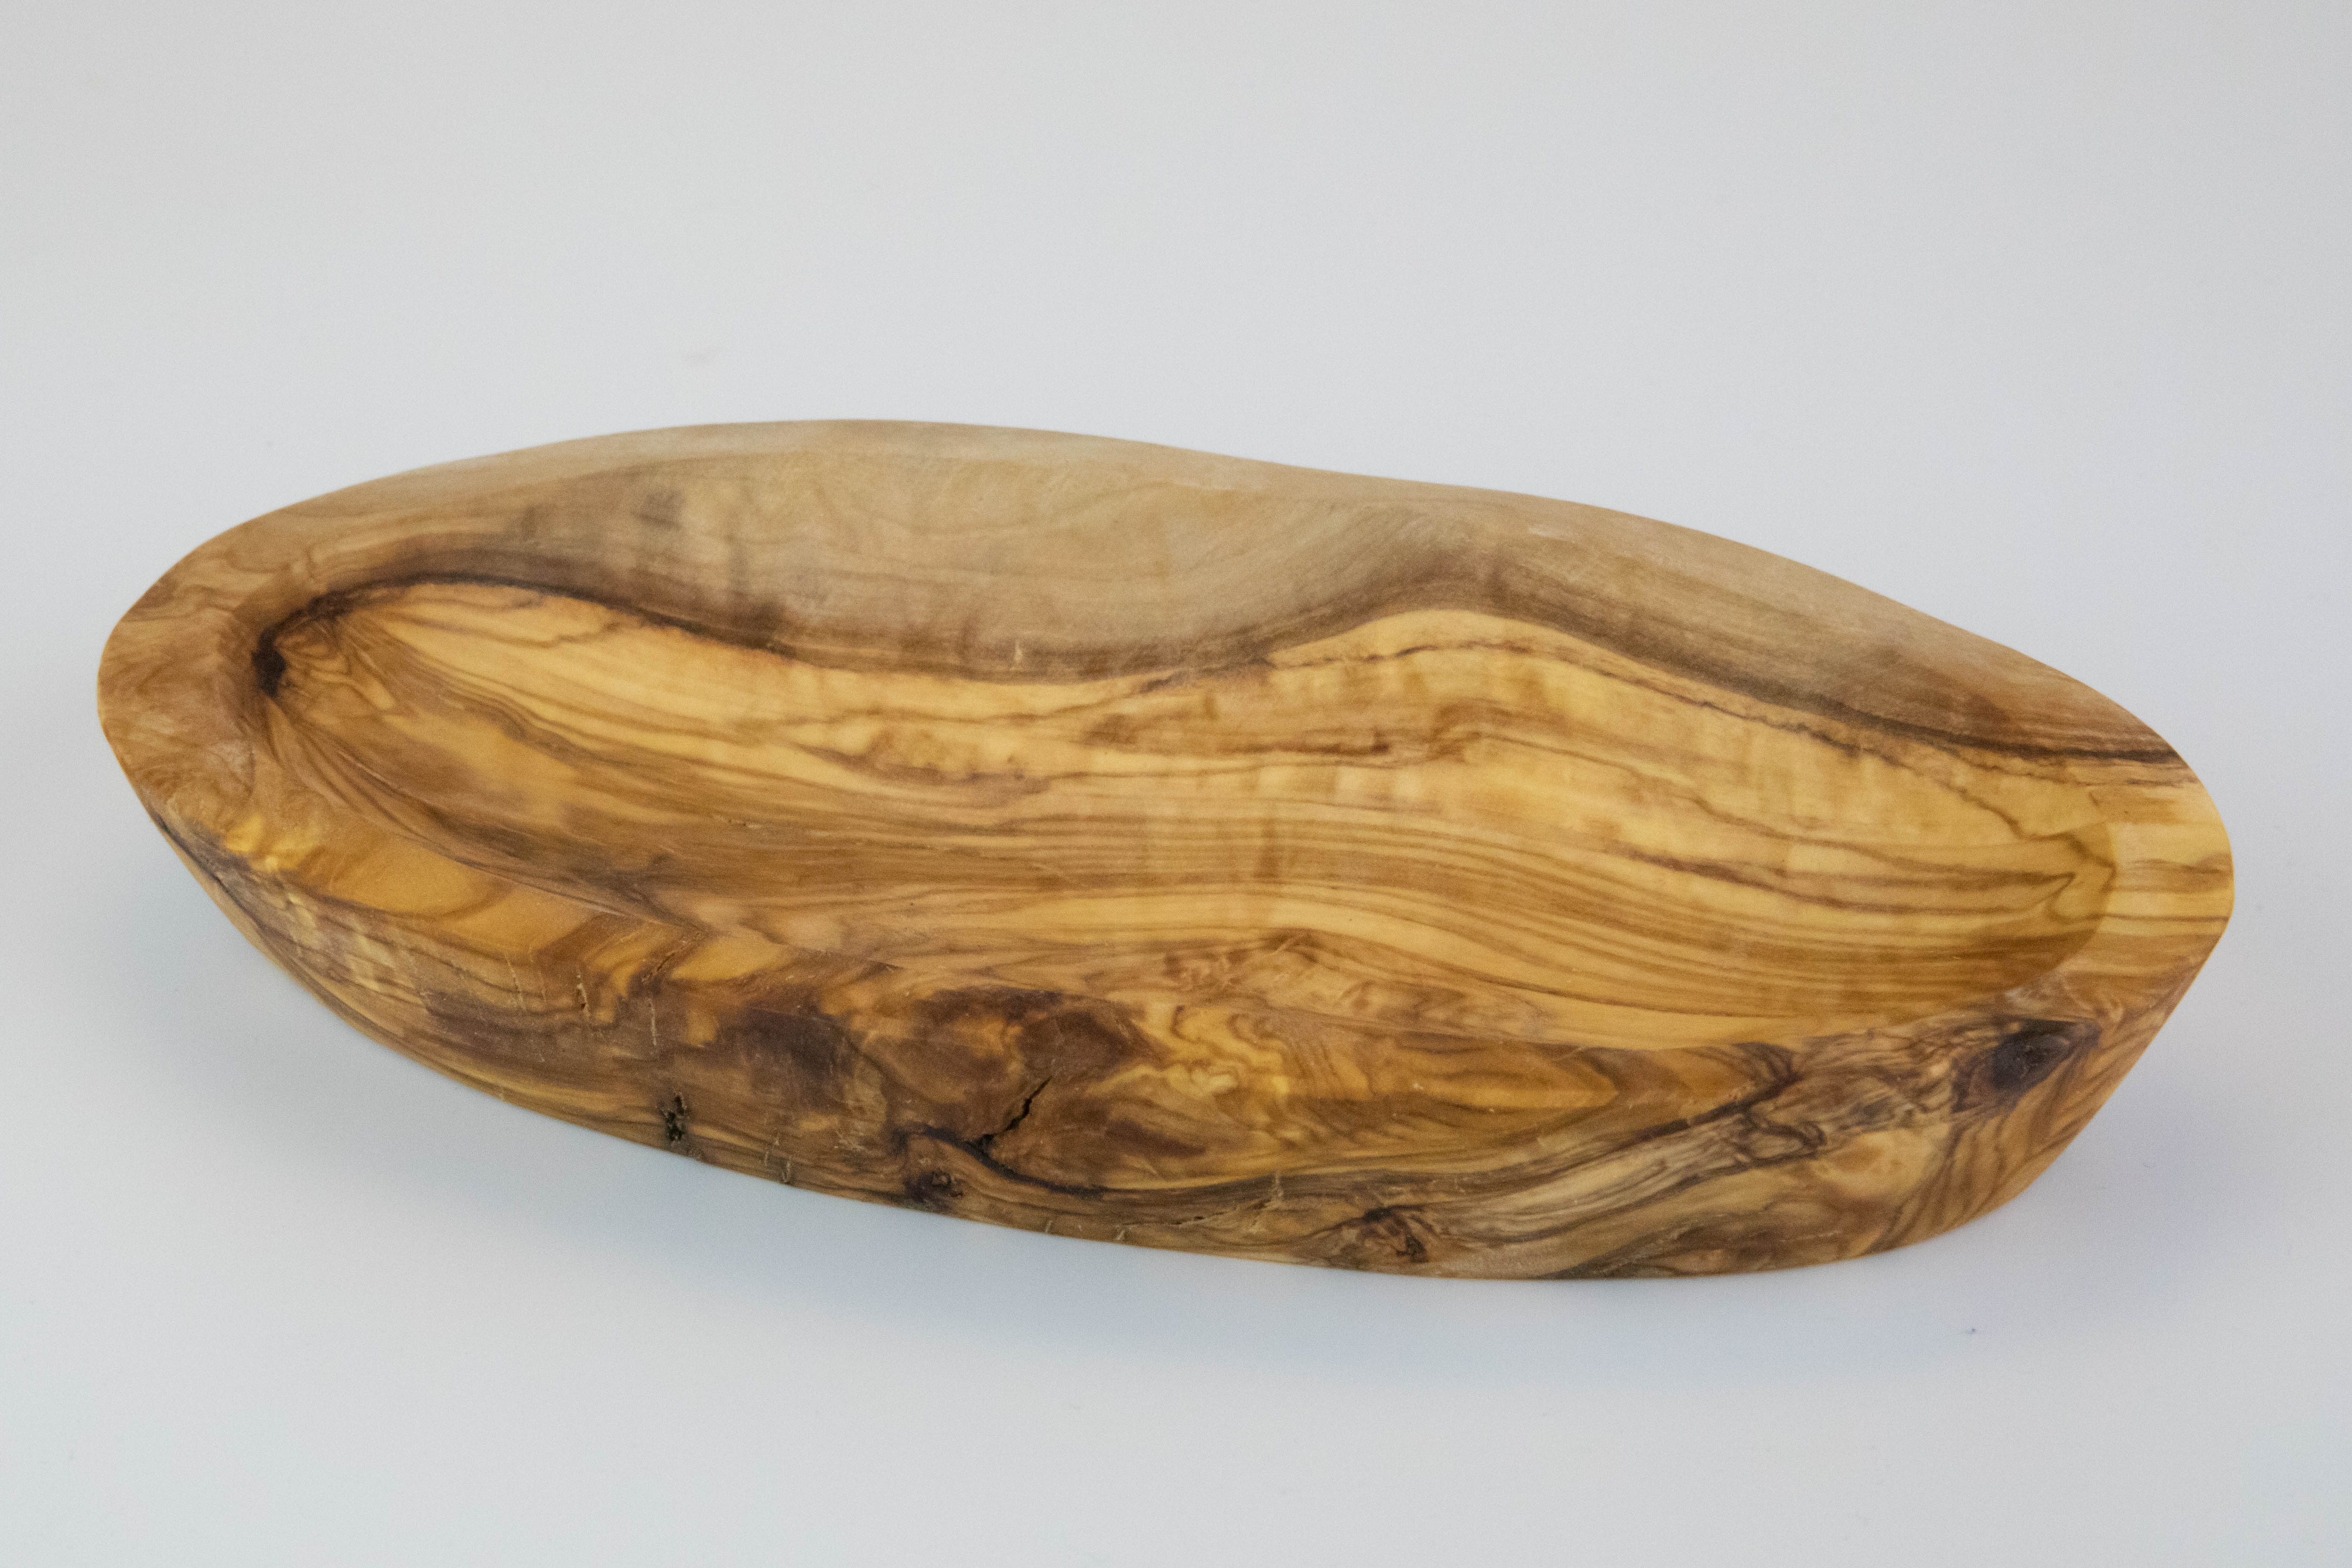 Olive wood bowls in various sizes.